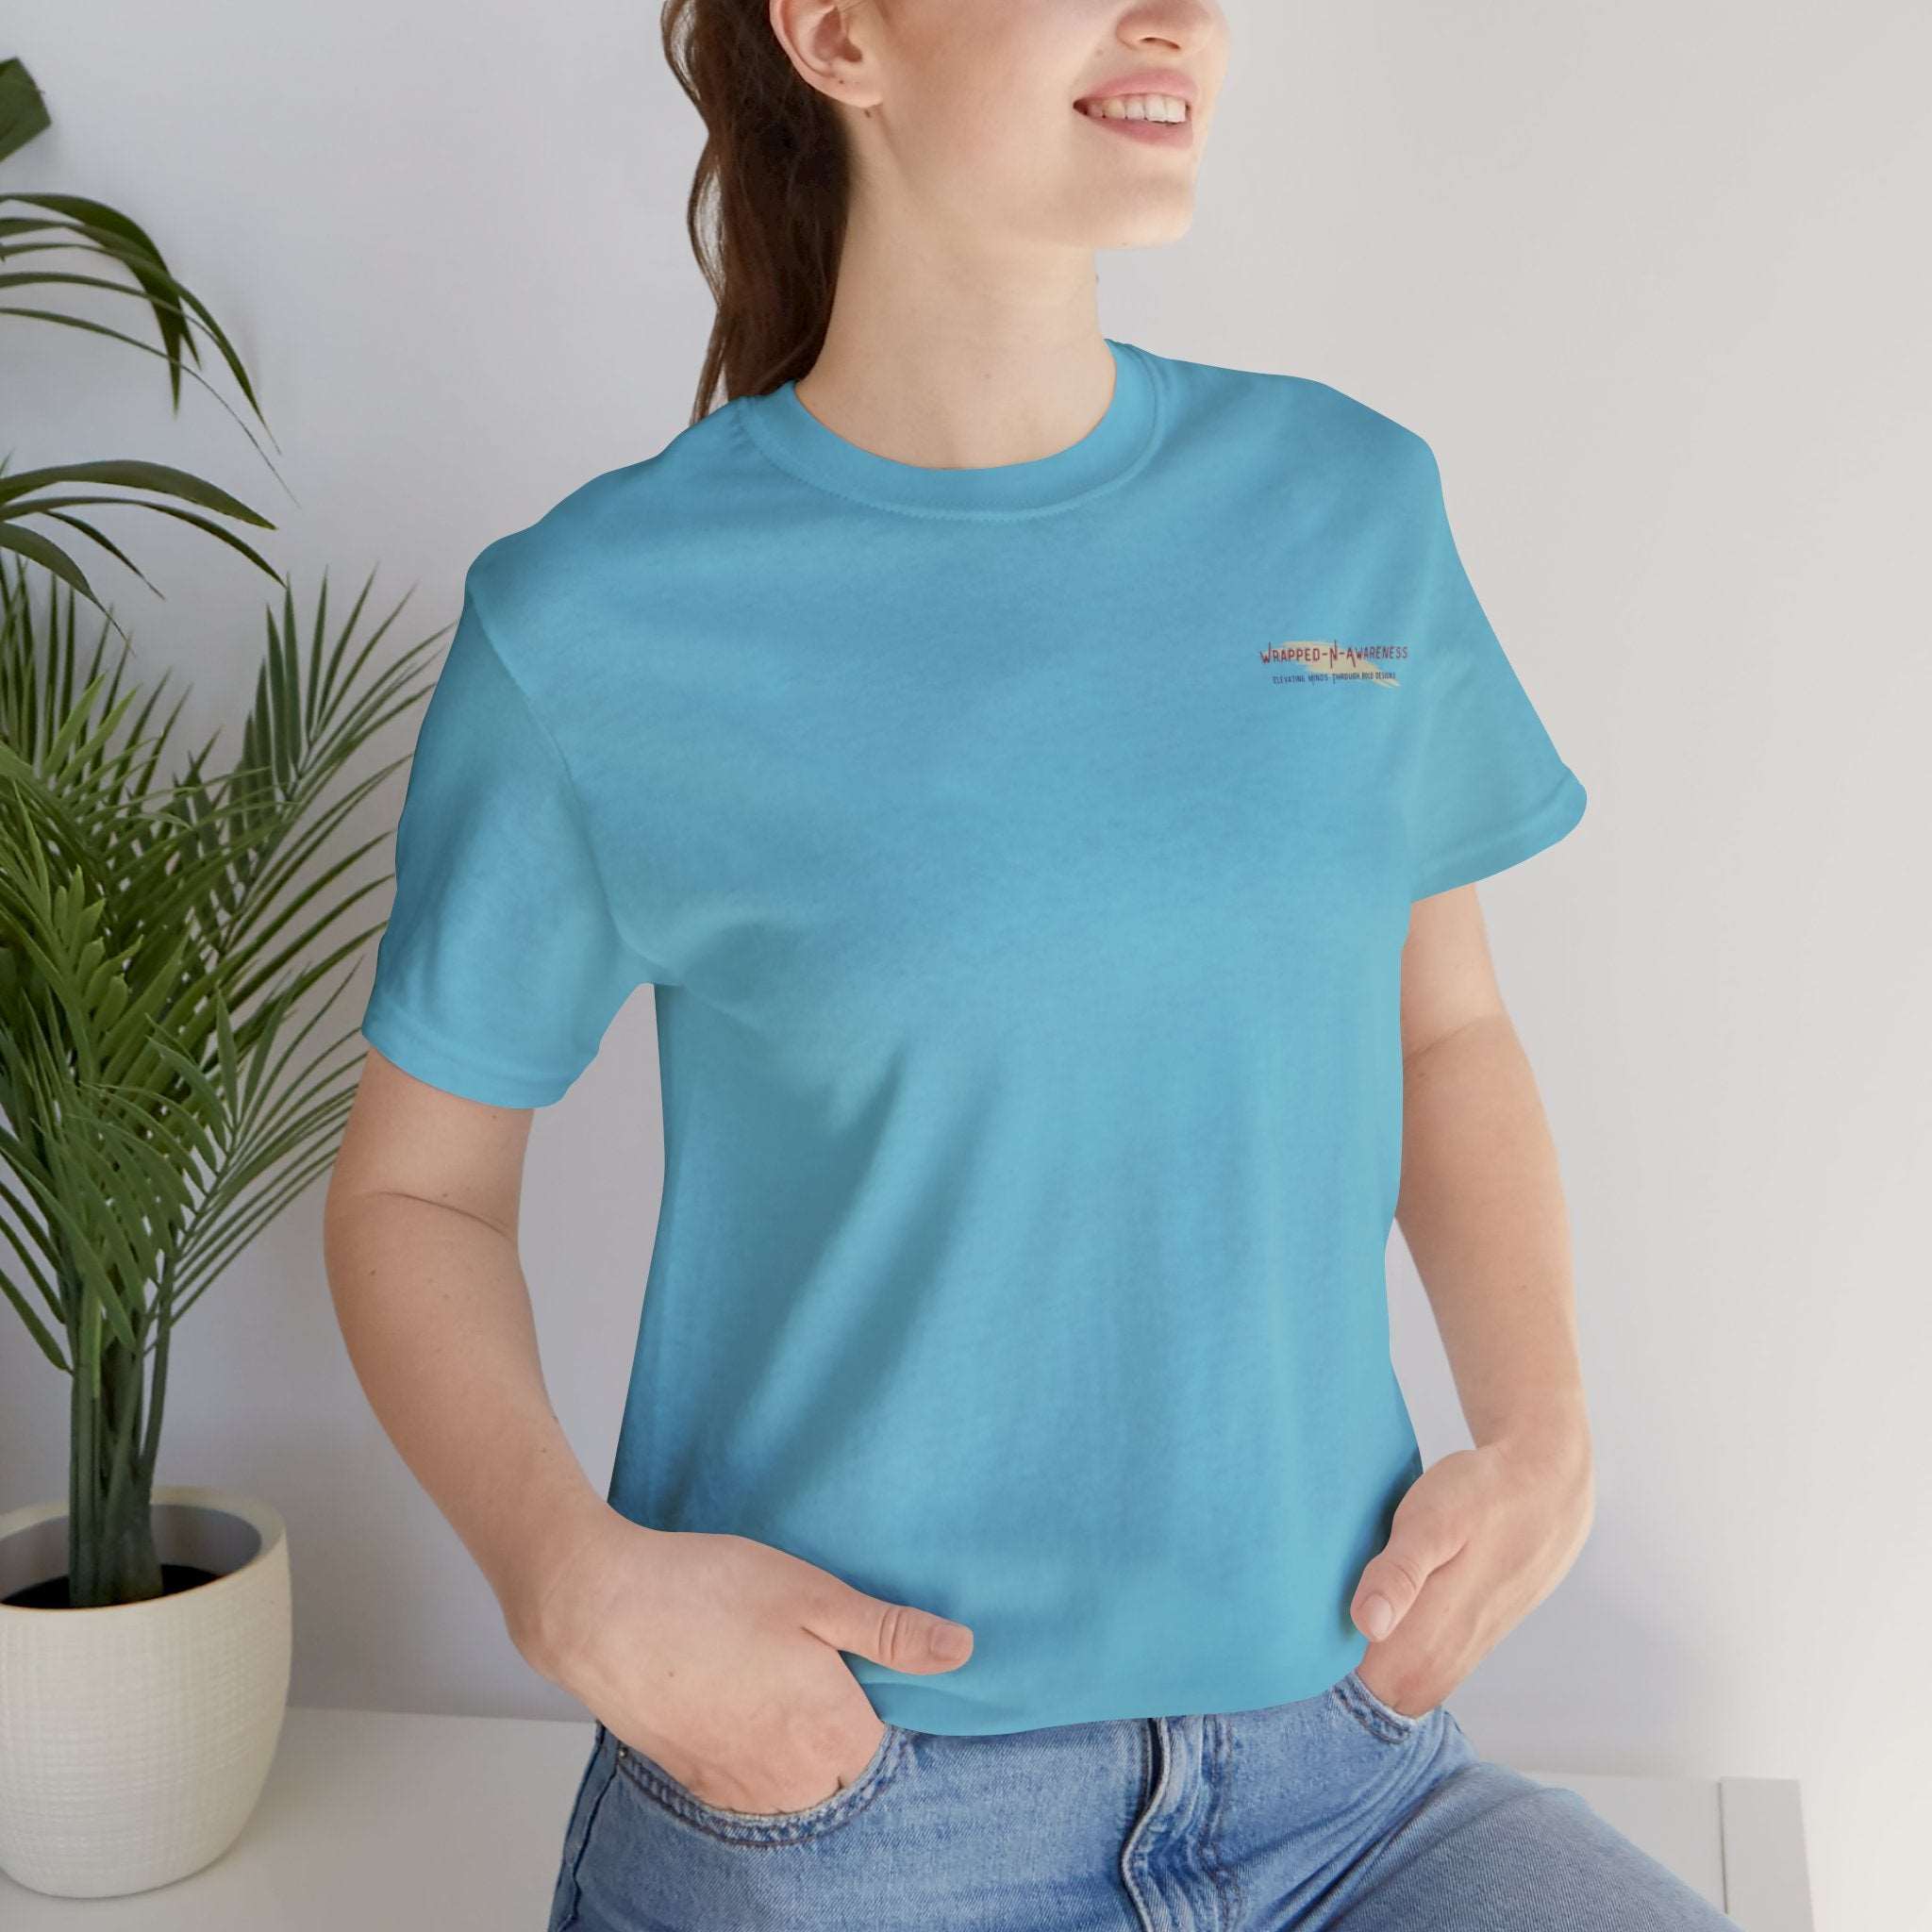 Find Your Balance Jersey Tee - Bella+Canvas 3001 Turquoise Airlume Cotton Bella+Canvas 3001 Crew Neckline Jersey Short Sleeve Lightweight Fabric Mental Health Support Retail Fit Tear-away Label Tee Unisex Tee T-Shirt 18043593729518118203_2048_dd149838-6edb-4a8b-a533-a37d7bf3f5c6 Printify